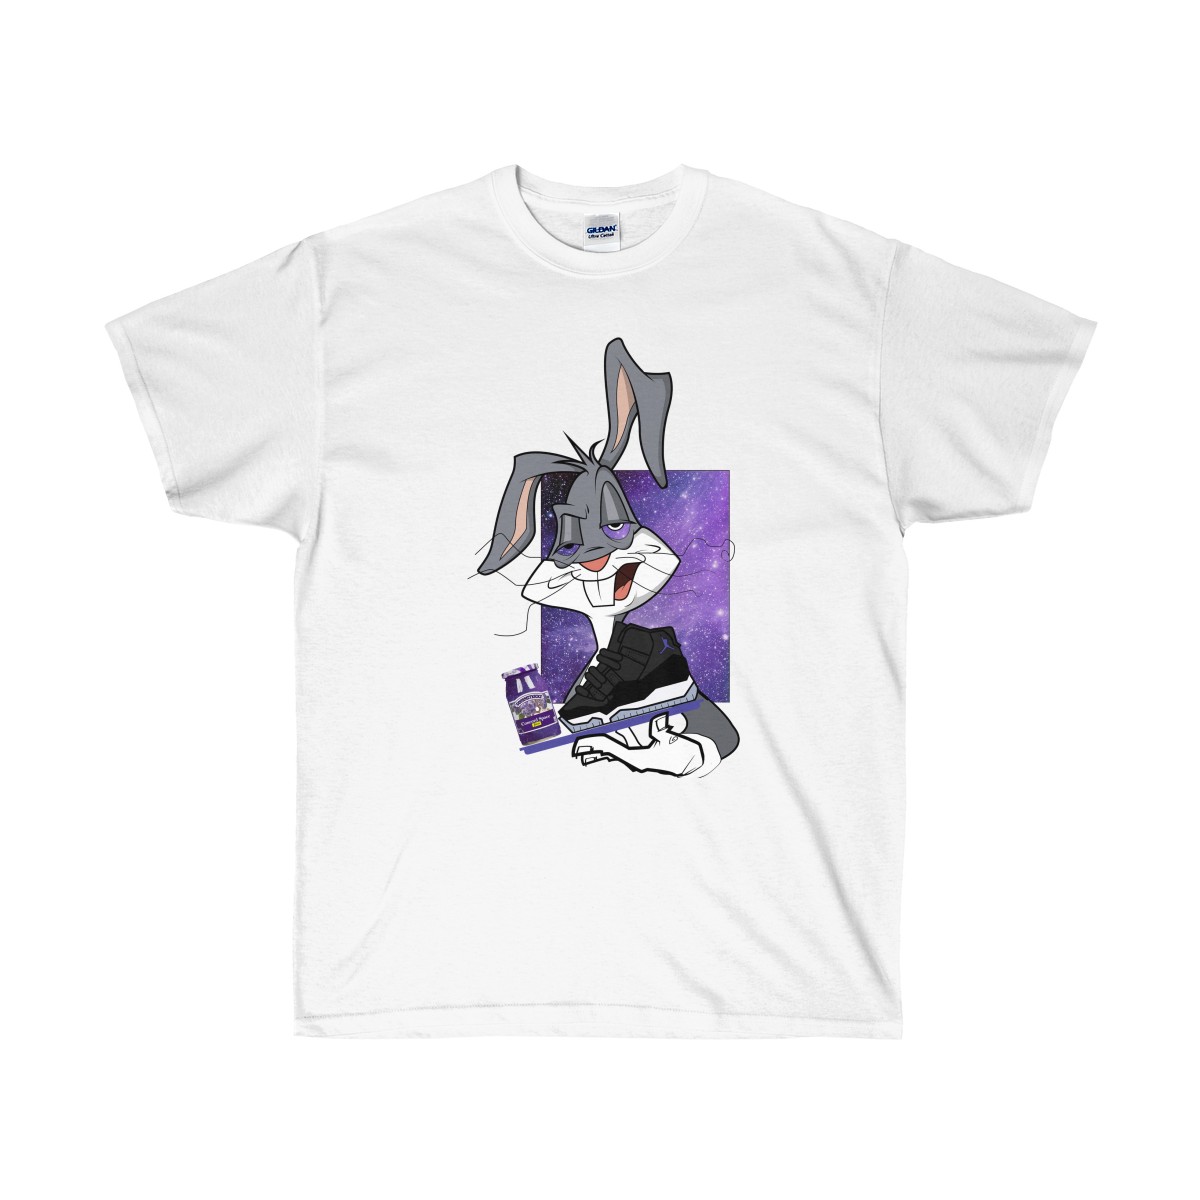 Space Jam 11 Match T-Shirt | Spaced Out Bugs